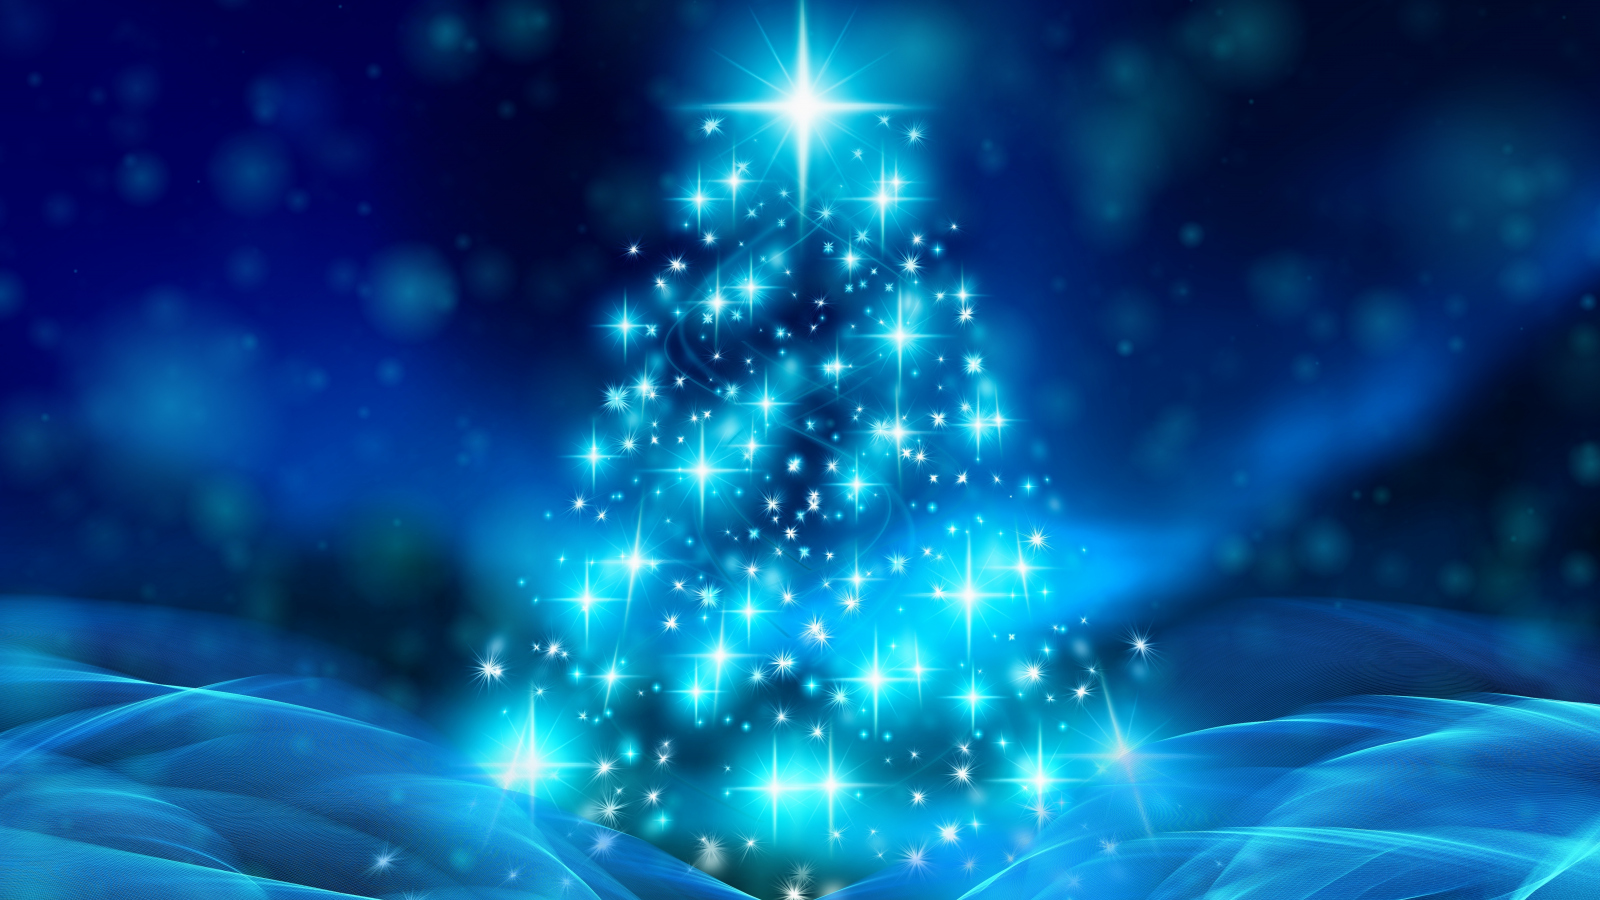 Download 1600x900 wallpaper christmas tree, bokeh, abstraction, widescreen 16: widescreen, 1600x900 HD image, background, 16726